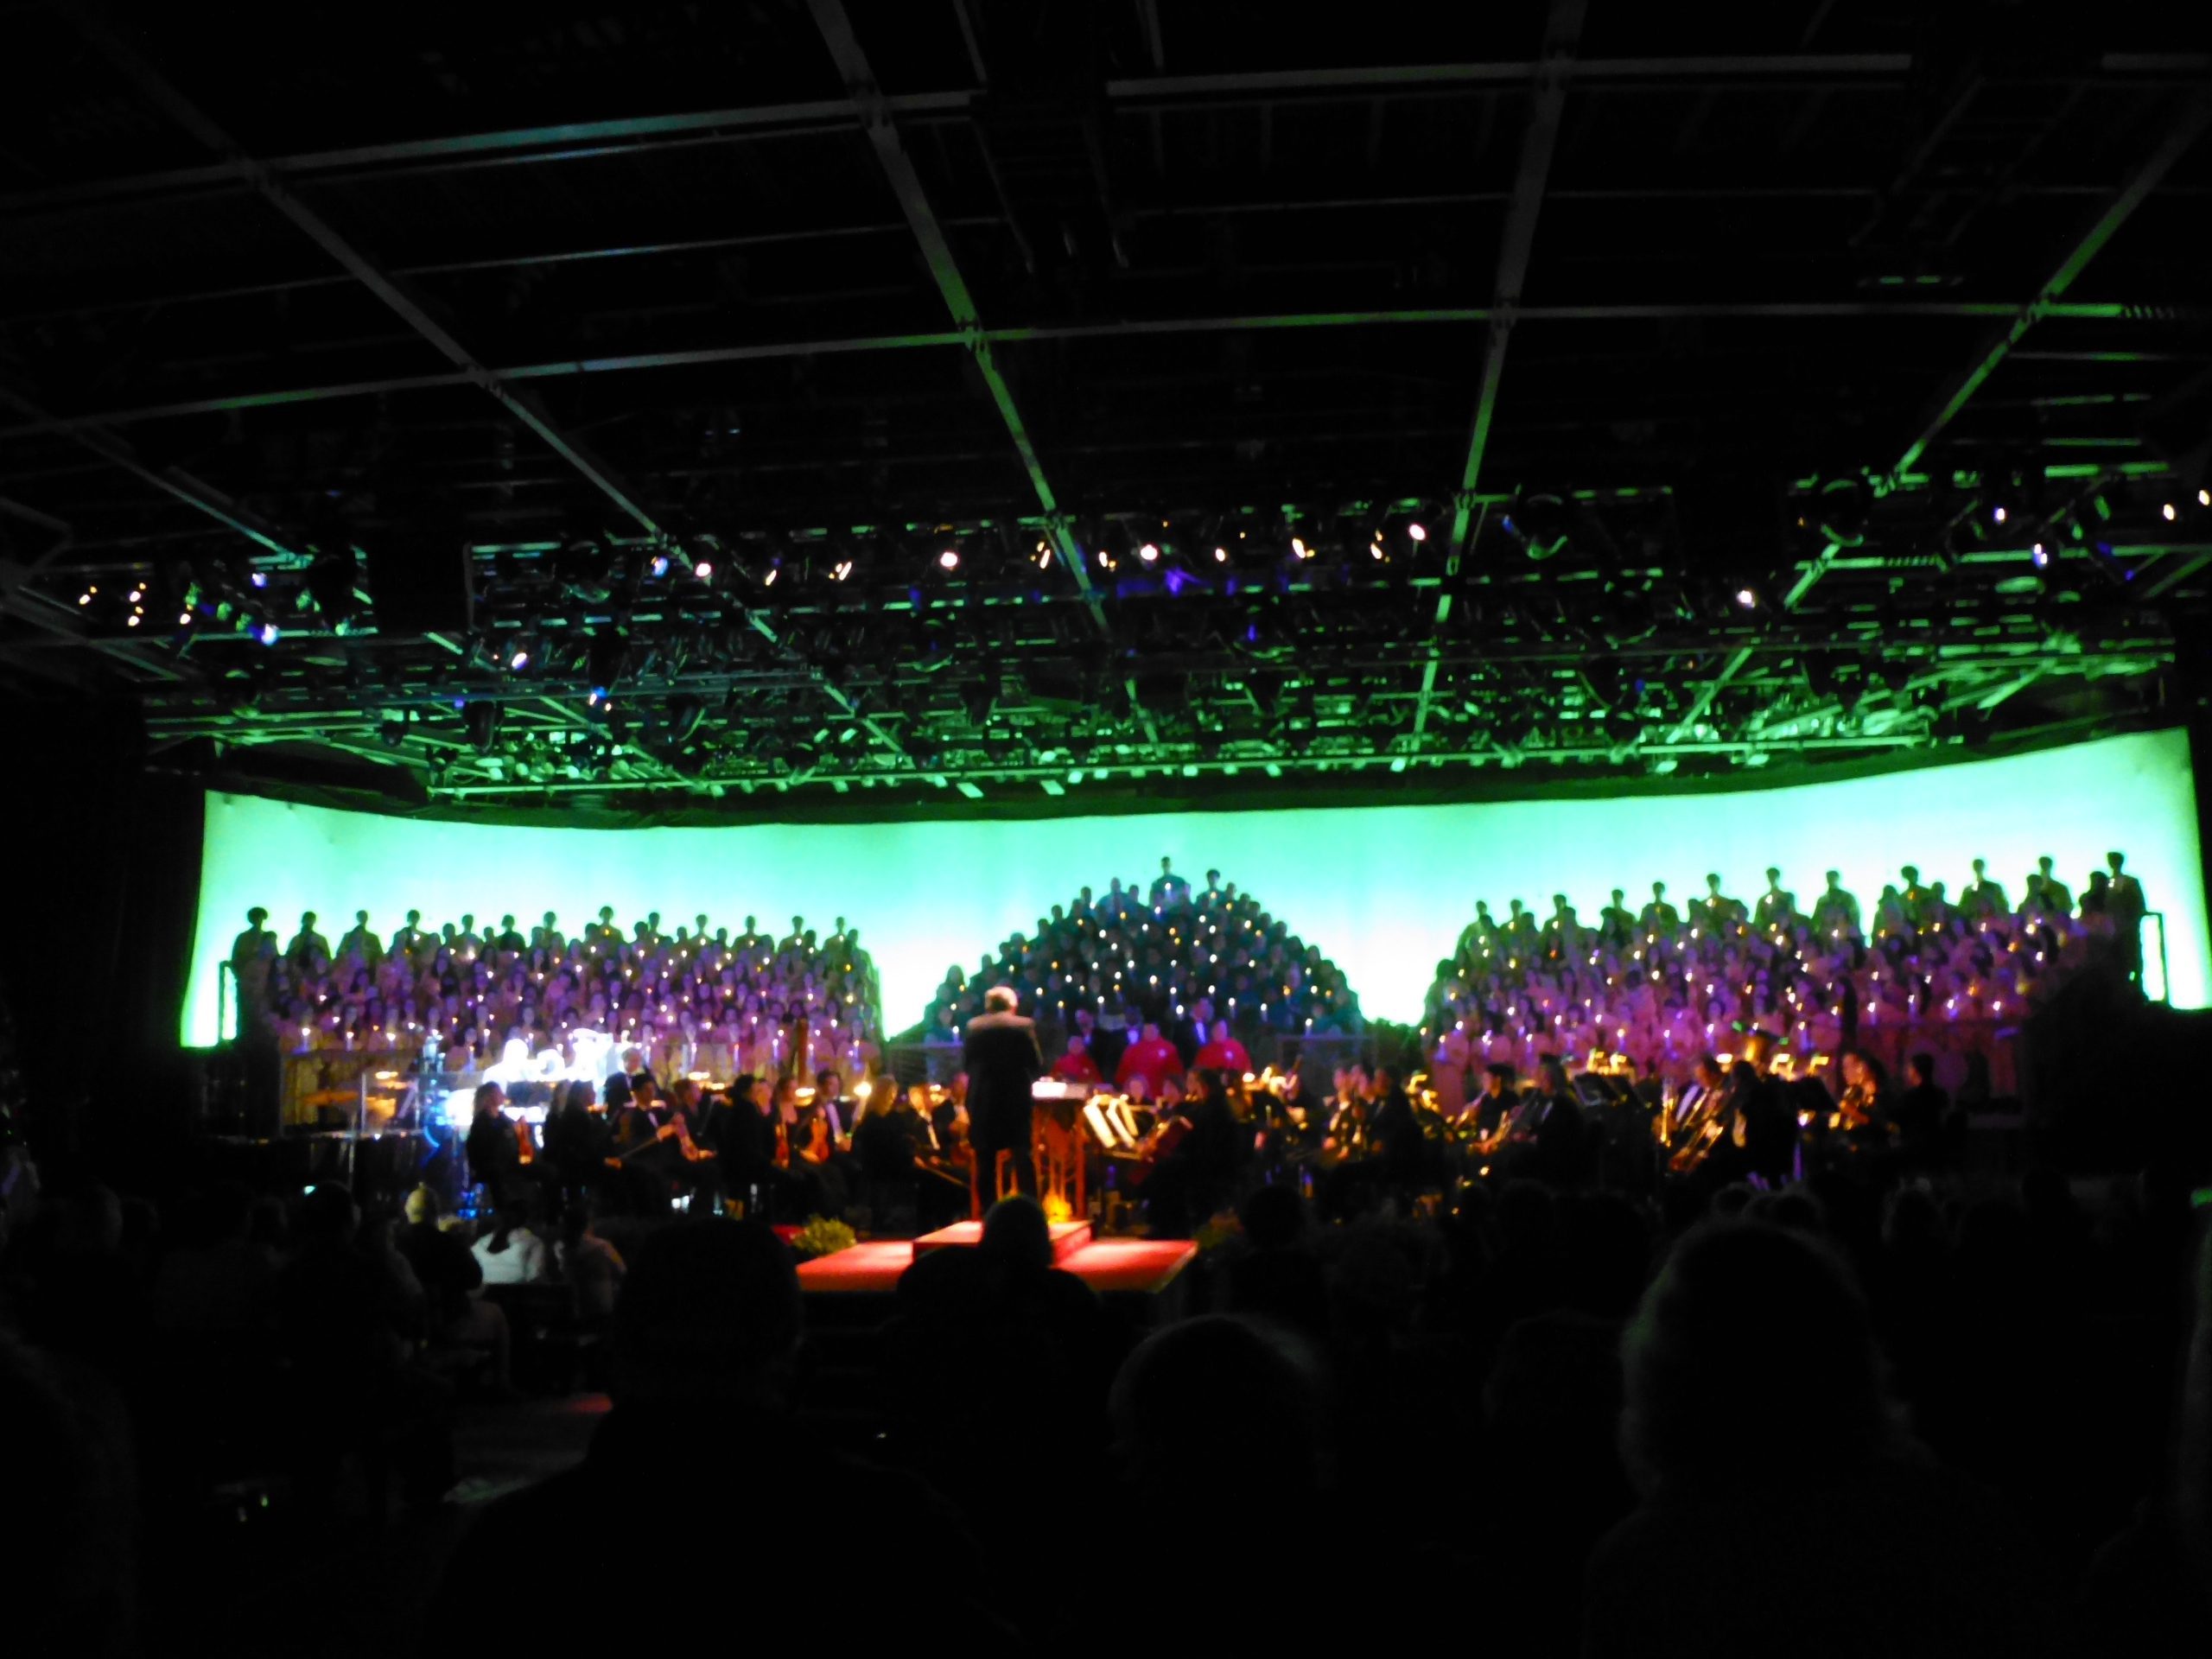 Disney’s Candlelight Processional: A Magical Holiday Celebration